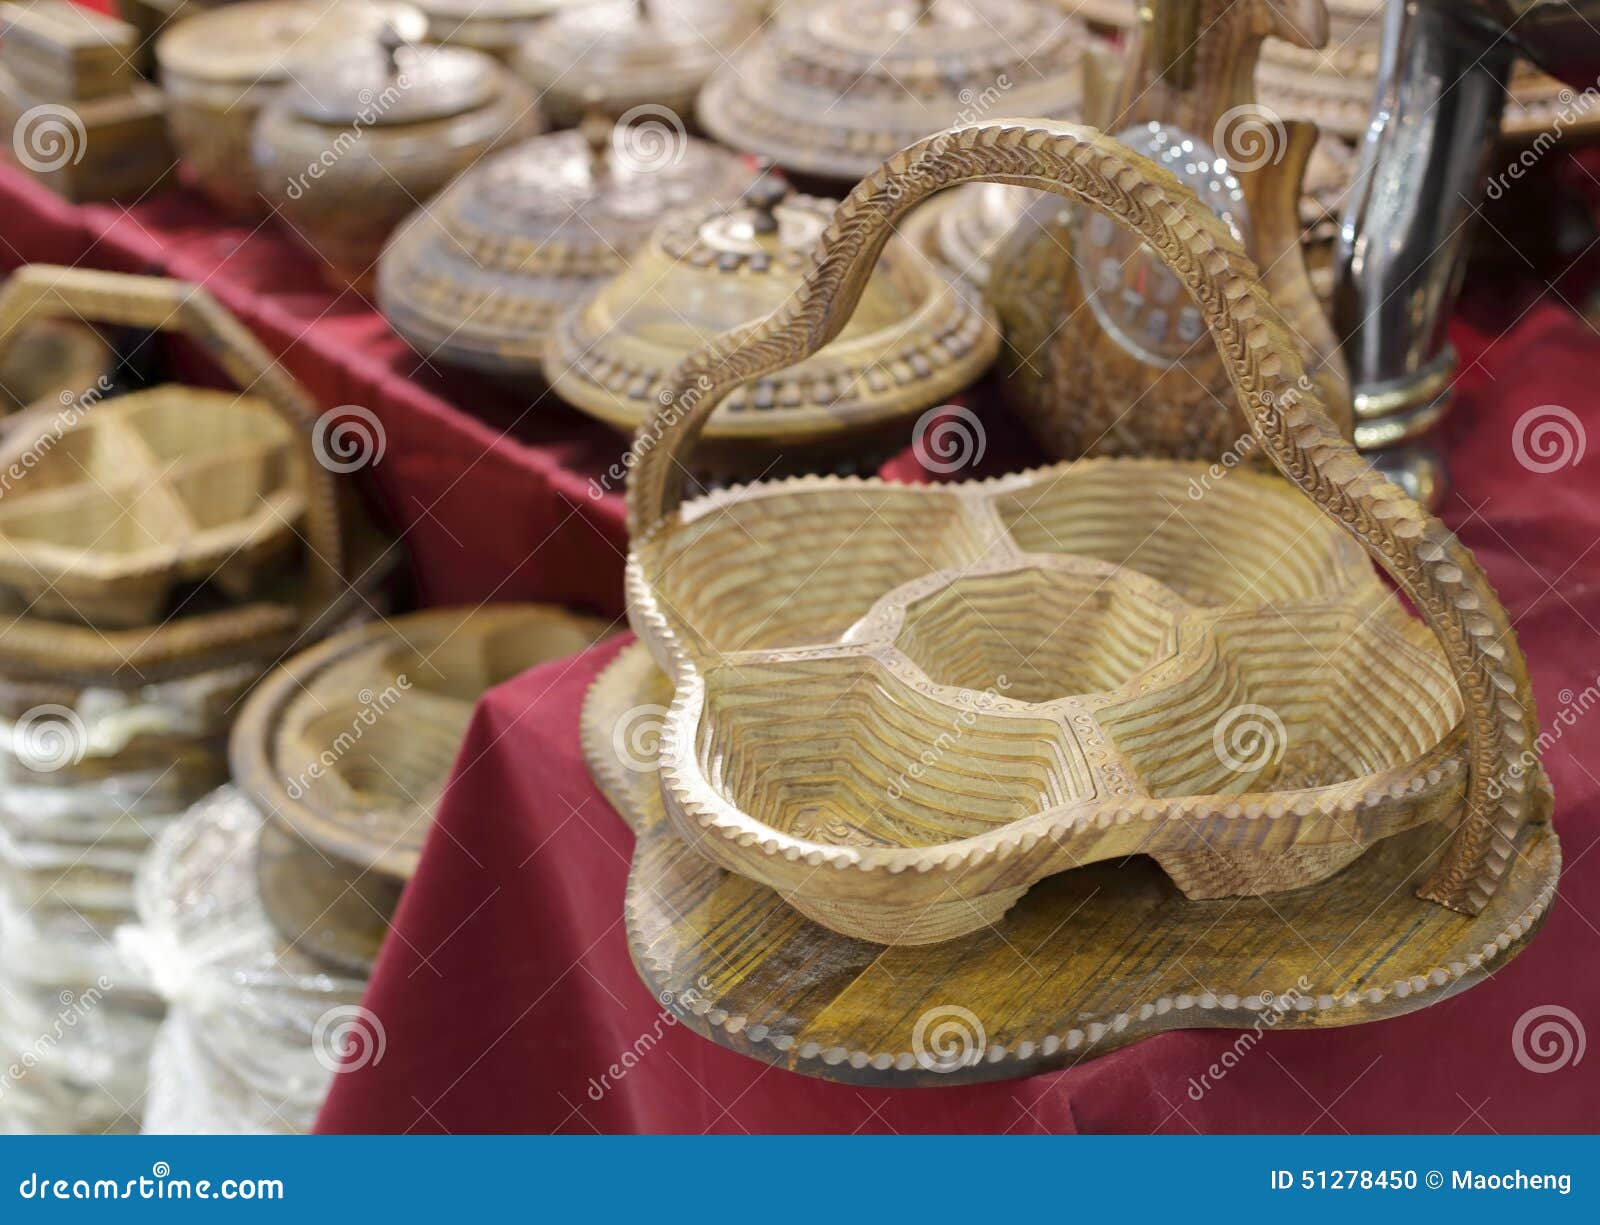 The Famous Pakistan Wooden Furniture Stock Photo - Image of furniture, engrave: 51278450